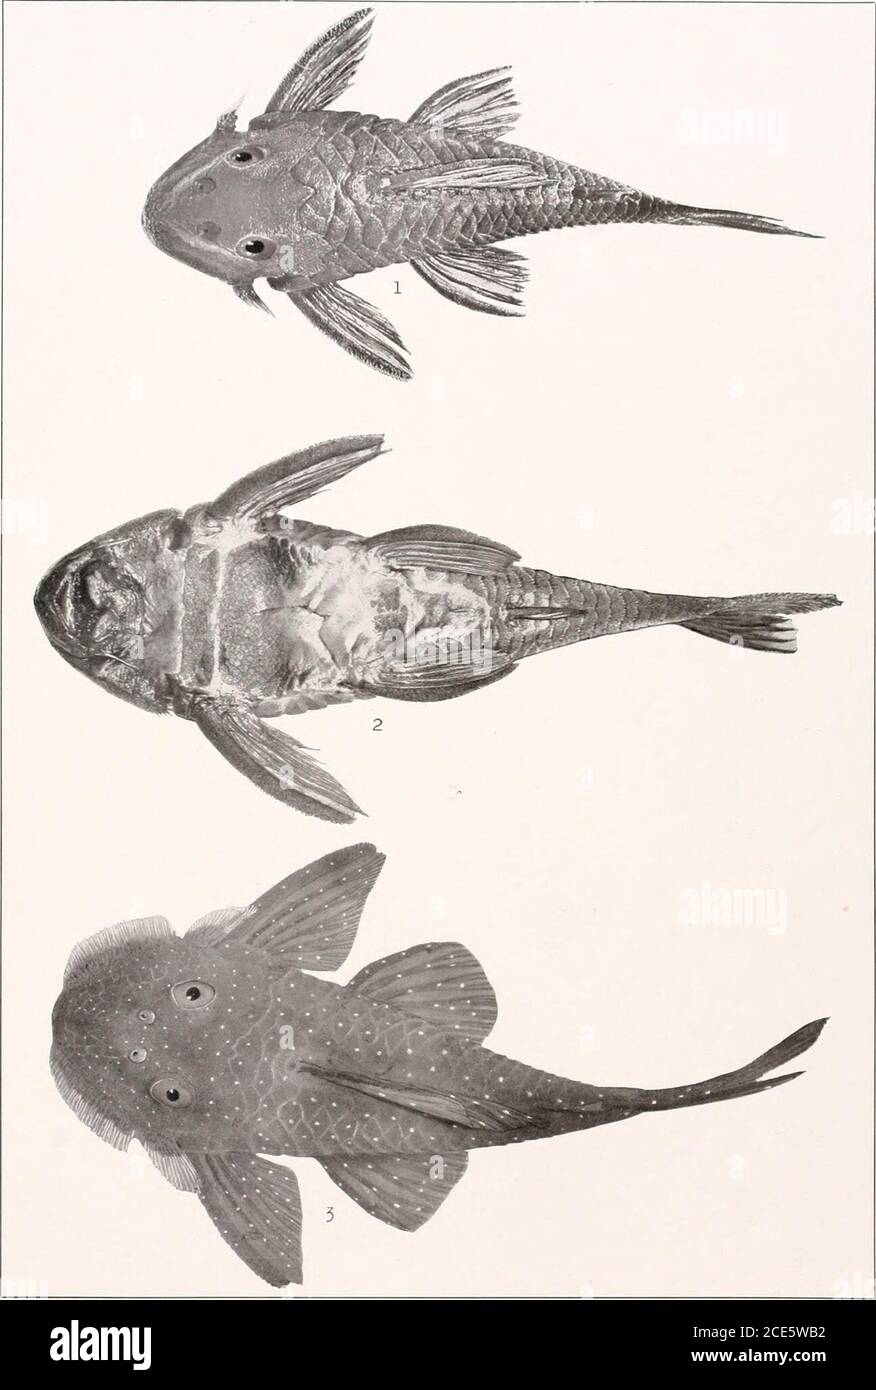 . The freshwater fishes of British Guiana, including a study of the ecological grouping of species and the relation of the fauna of the plateau to that of the lowlands . 1 :!. Corymbophanes andersoni Eigenmann. (Type.) 86 mm. No. 1001. Memoirs Carnegie Museum, Vol. V. Plate xxviii.. 1-2. Hemiancistrus braueri Eigenmann. (Type.) 120 nun. In3. Pseudancistrus barbatus (Cuvieh and Valenciennes). Berlin Museum. (Coll. Schomburgk.)140 mm. No. 1533. Memoirs Carnegie Museum, Vol. V. Plate XXIX. Stock Photo